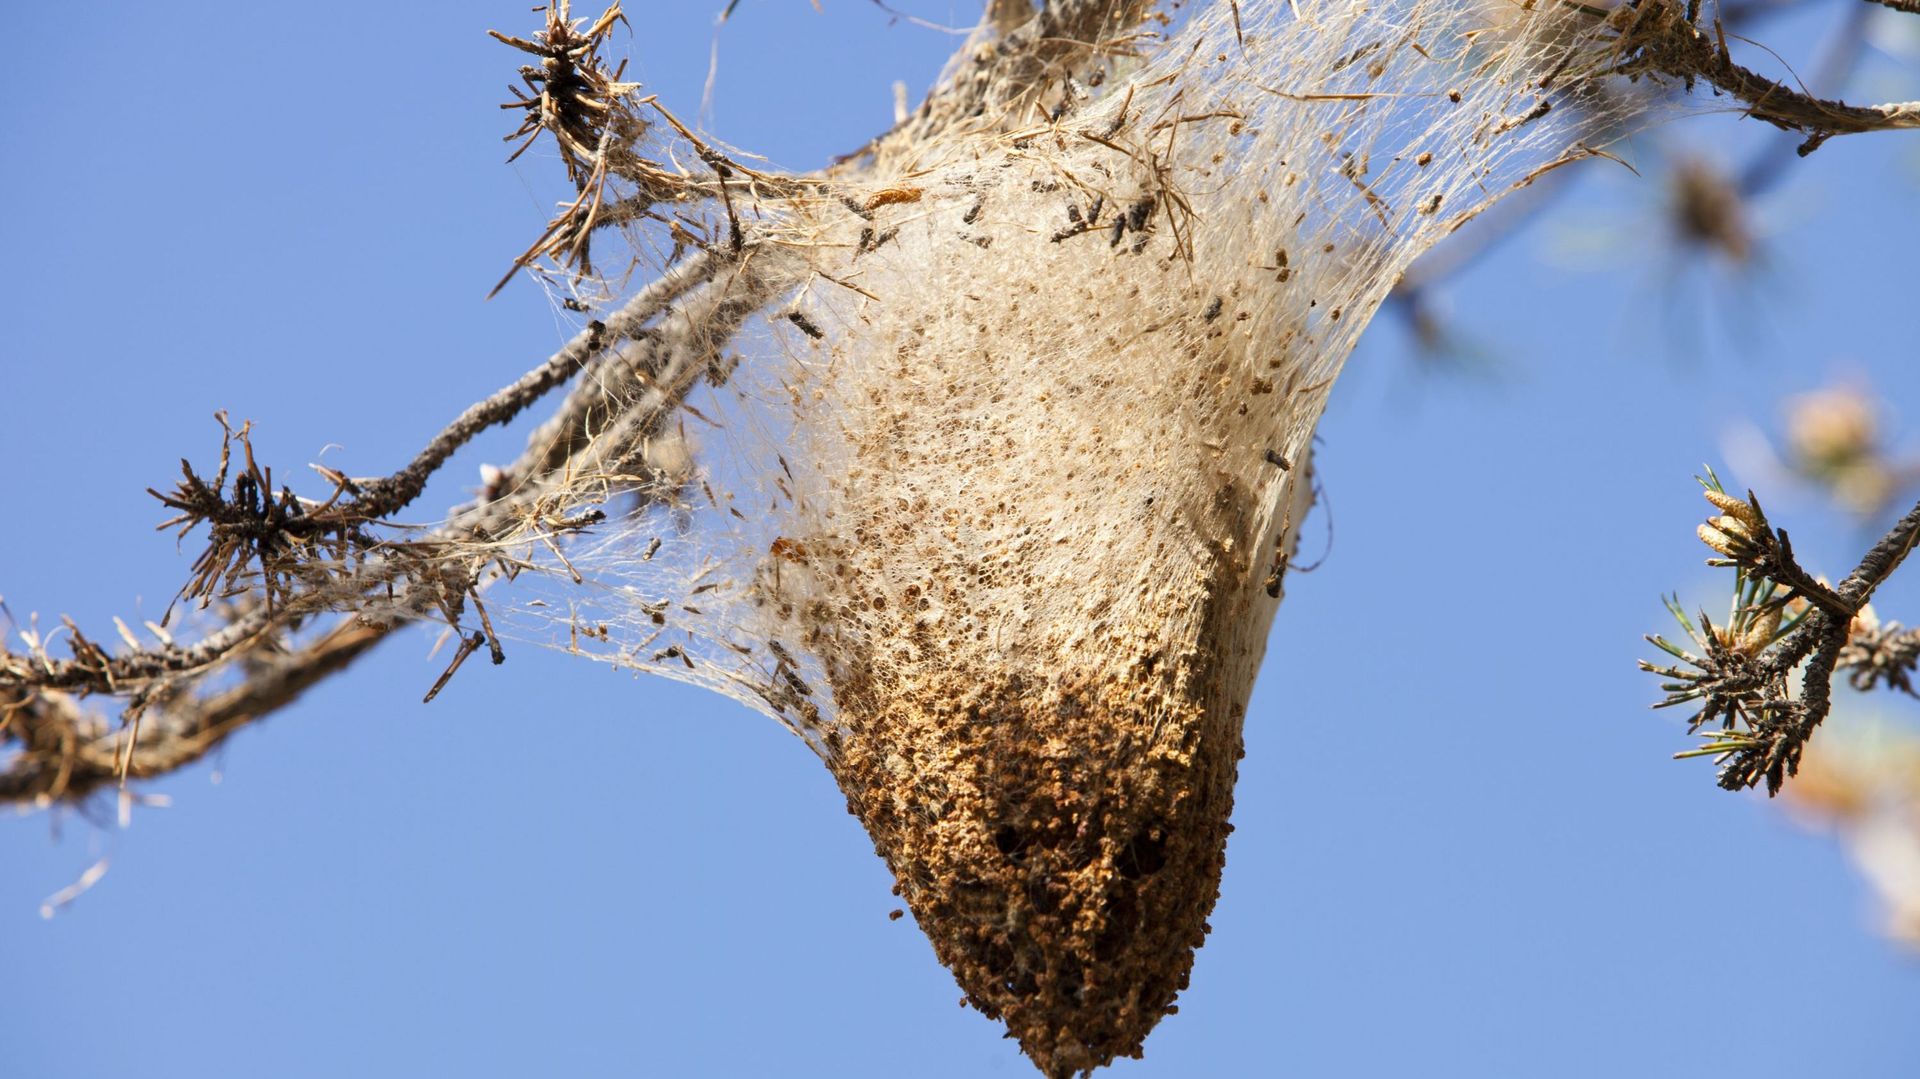 Nests of the Pine Processionary Caterpiller in the Sierra Nevada mountains of southern Spain.